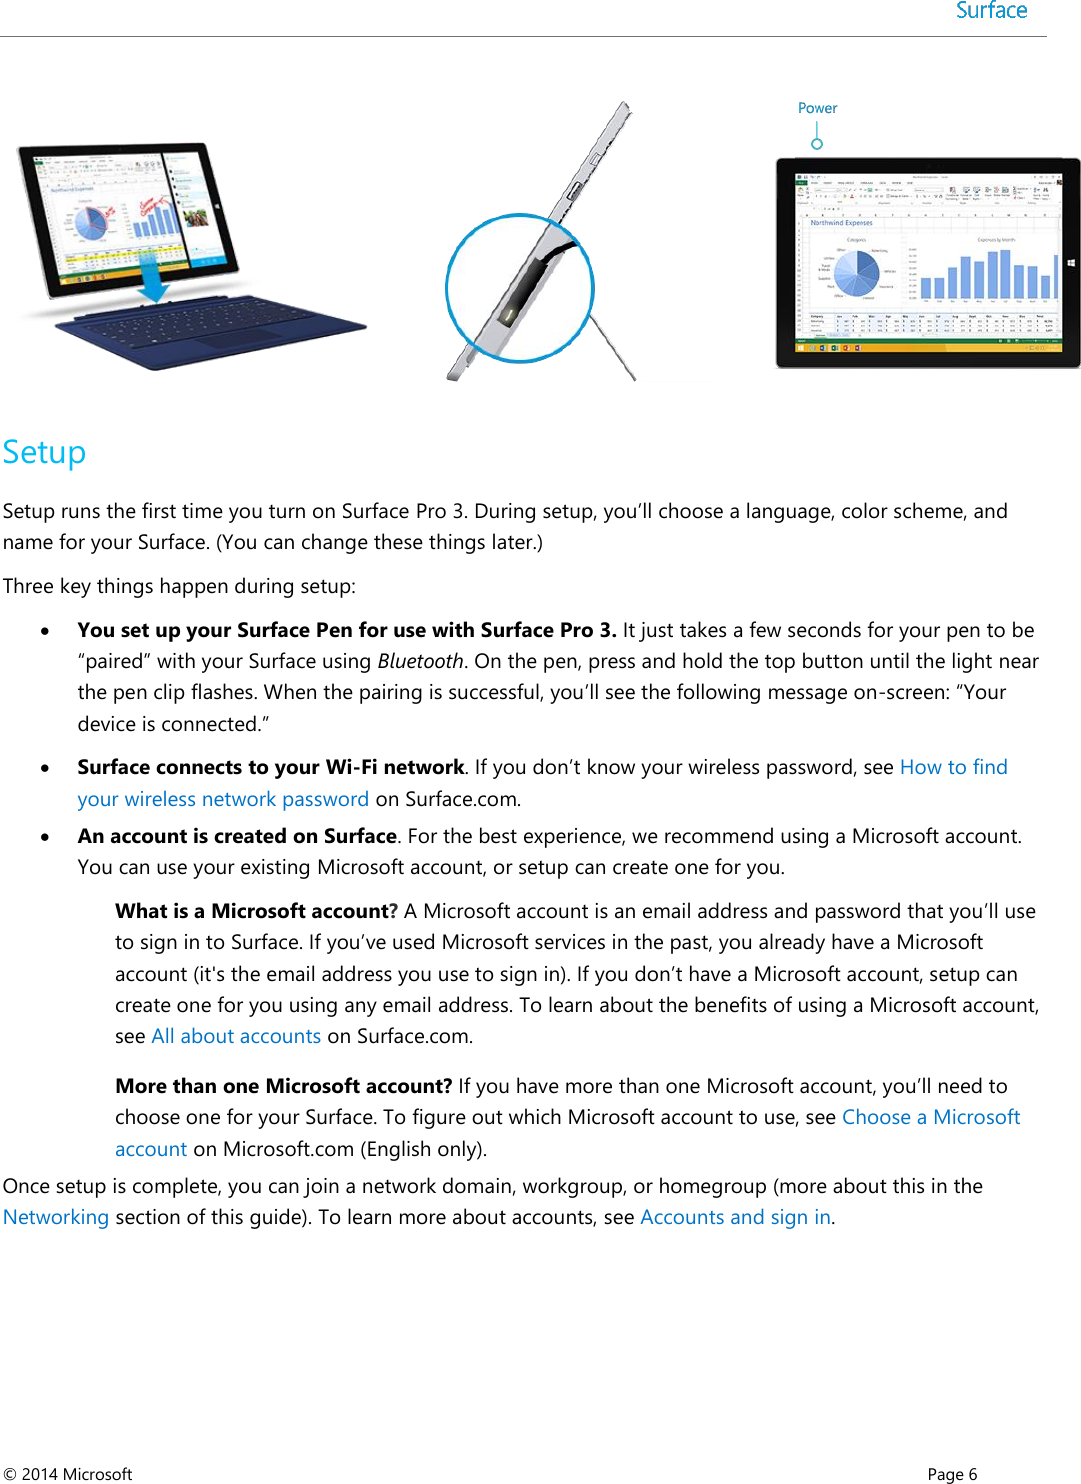  © 2014 Microsoft      Page 6      Setup Setup runs the first time you turn on Surface Pro 3. During setup, you’ll choose a language, color scheme, and name for your Surface. (You can change these things later.)  Three key things happen during setup:  You set up your Surface Pen for use with Surface Pro 3. It just takes a few seconds for your pen to be “paired” with your Surface using Bluetooth. On the pen, press and hold the top button until the light near the pen clip flashes. When the pairing is successful, you’ll see the following message on-screen: “Your device is connected.”  Surface connects to your Wi-Fi network. If you don’t know your wireless password, see How to find your wireless network password on Surface.com.   An account is created on Surface. For the best experience, we recommend using a Microsoft account. You can use your existing Microsoft account, or setup can create one for you.  What is a Microsoft account? A Microsoft account is an email address and password that you’ll use to sign in to Surface. If you’ve used Microsoft services in the past, you already have a Microsoft account (it&apos;s the email address you use to sign in). If you don’t have a Microsoft account, setup can create one for you using any email address. To learn about the benefits of using a Microsoft account, see All about accounts on Surface.com. More than one Microsoft account? If you have more than one Microsoft account, you’ll need to choose one for your Surface. To figure out which Microsoft account to use, see Choose a Microsoft account on Microsoft.com (English only).  Once setup is complete, you can join a network domain, workgroup, or homegroup (more about this in the Networking section of this guide). To learn more about accounts, see Accounts and sign in. 